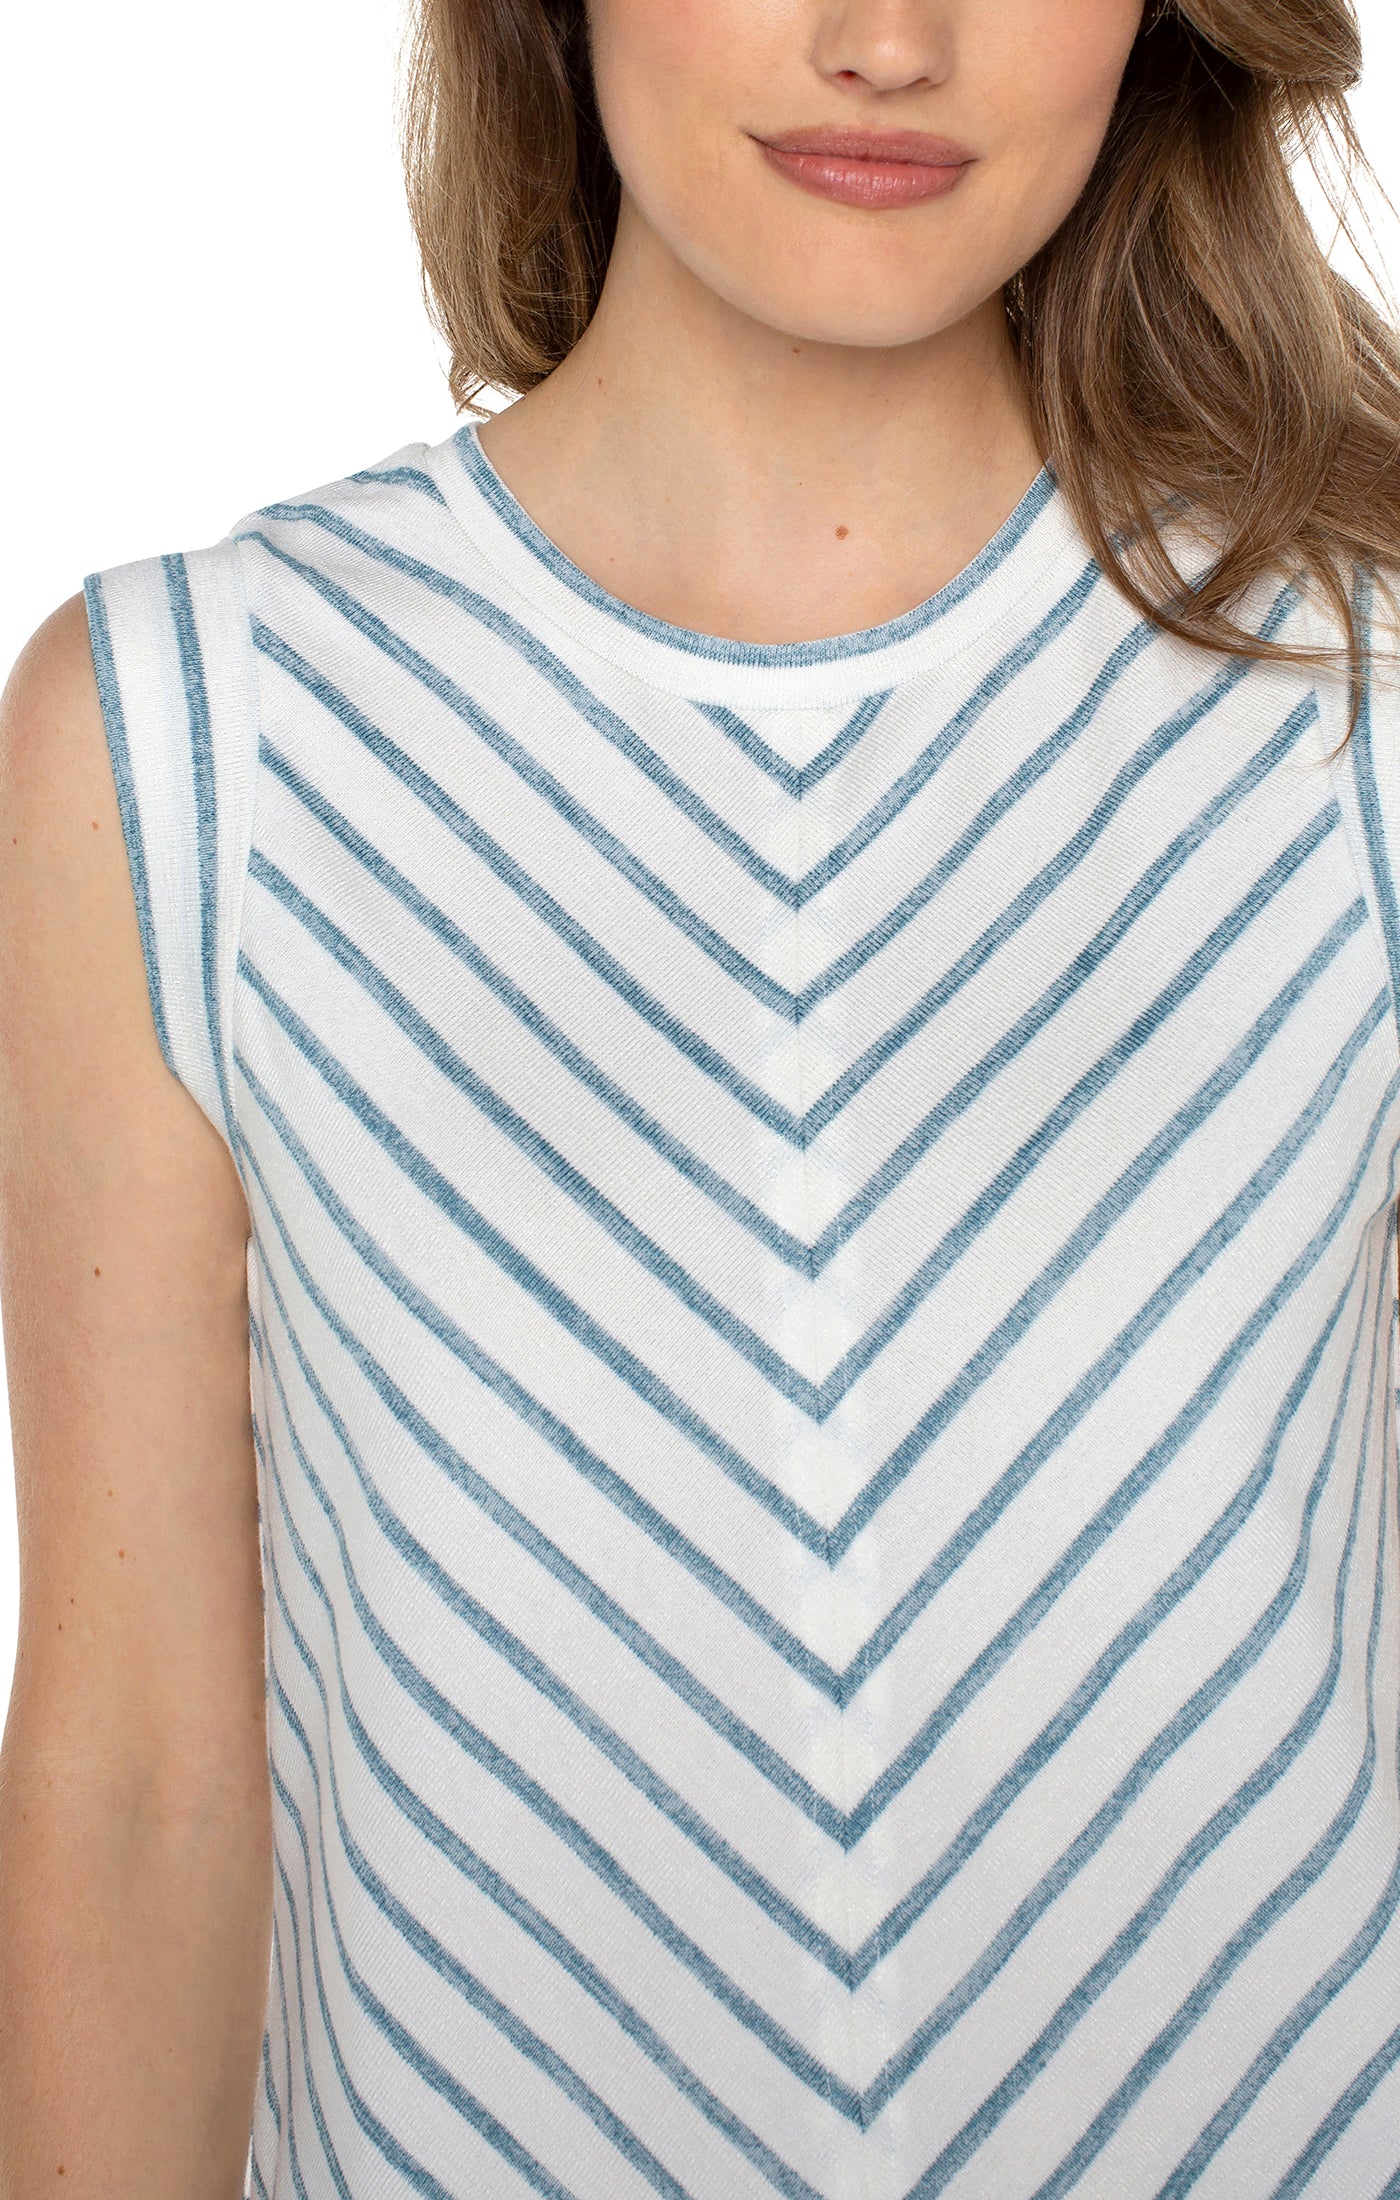 Liverpool Scoop Neck Modern Muscle Tee - White Ocean Blue stripe Close Up View